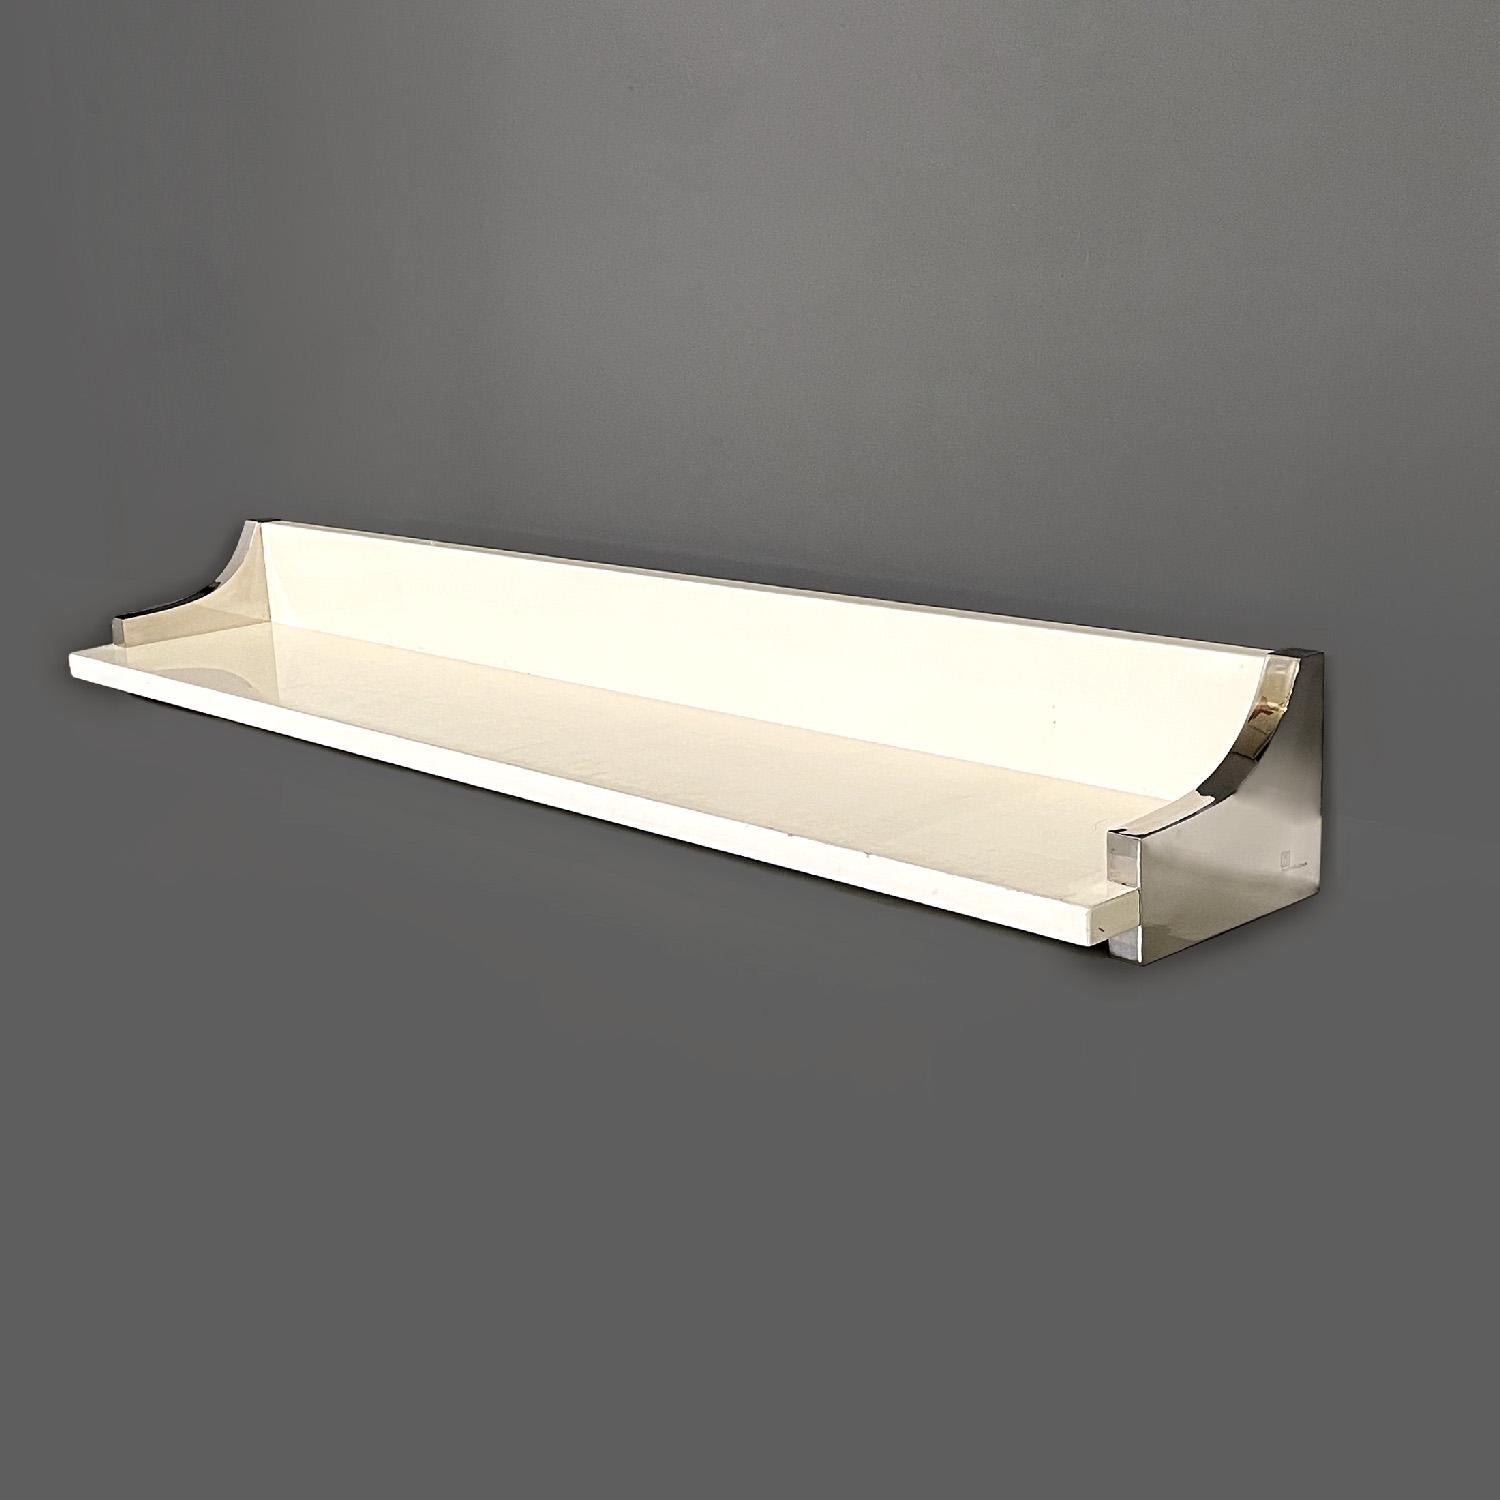 Italian modern white lacquered wood and chromed metal shelf by D.I.D., 1980s In Good Condition For Sale In MIlano, IT